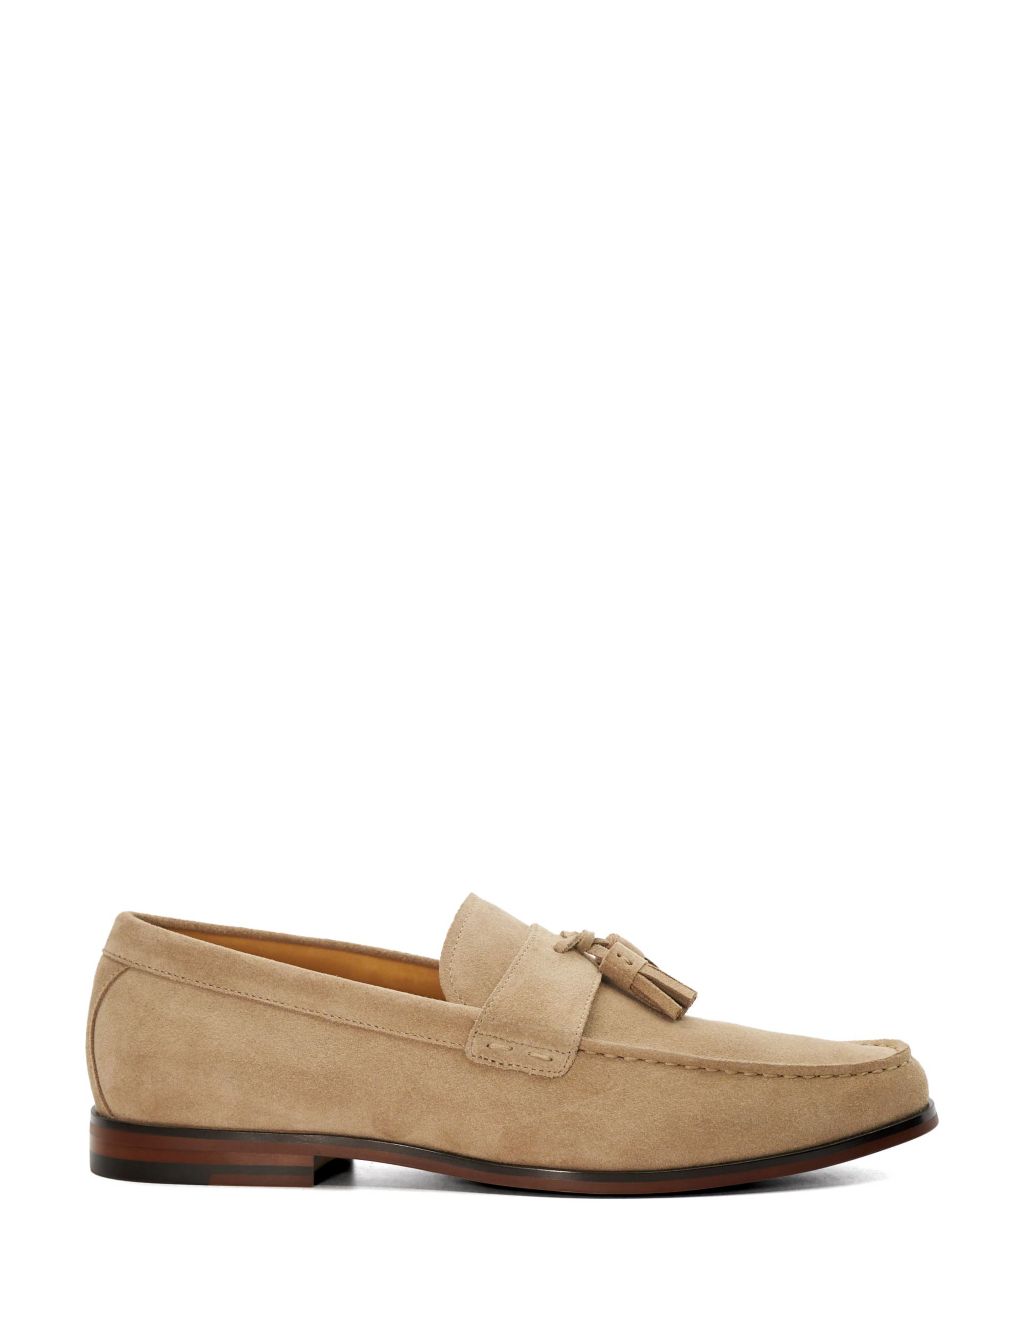 Men’s Loafers Available at M&S